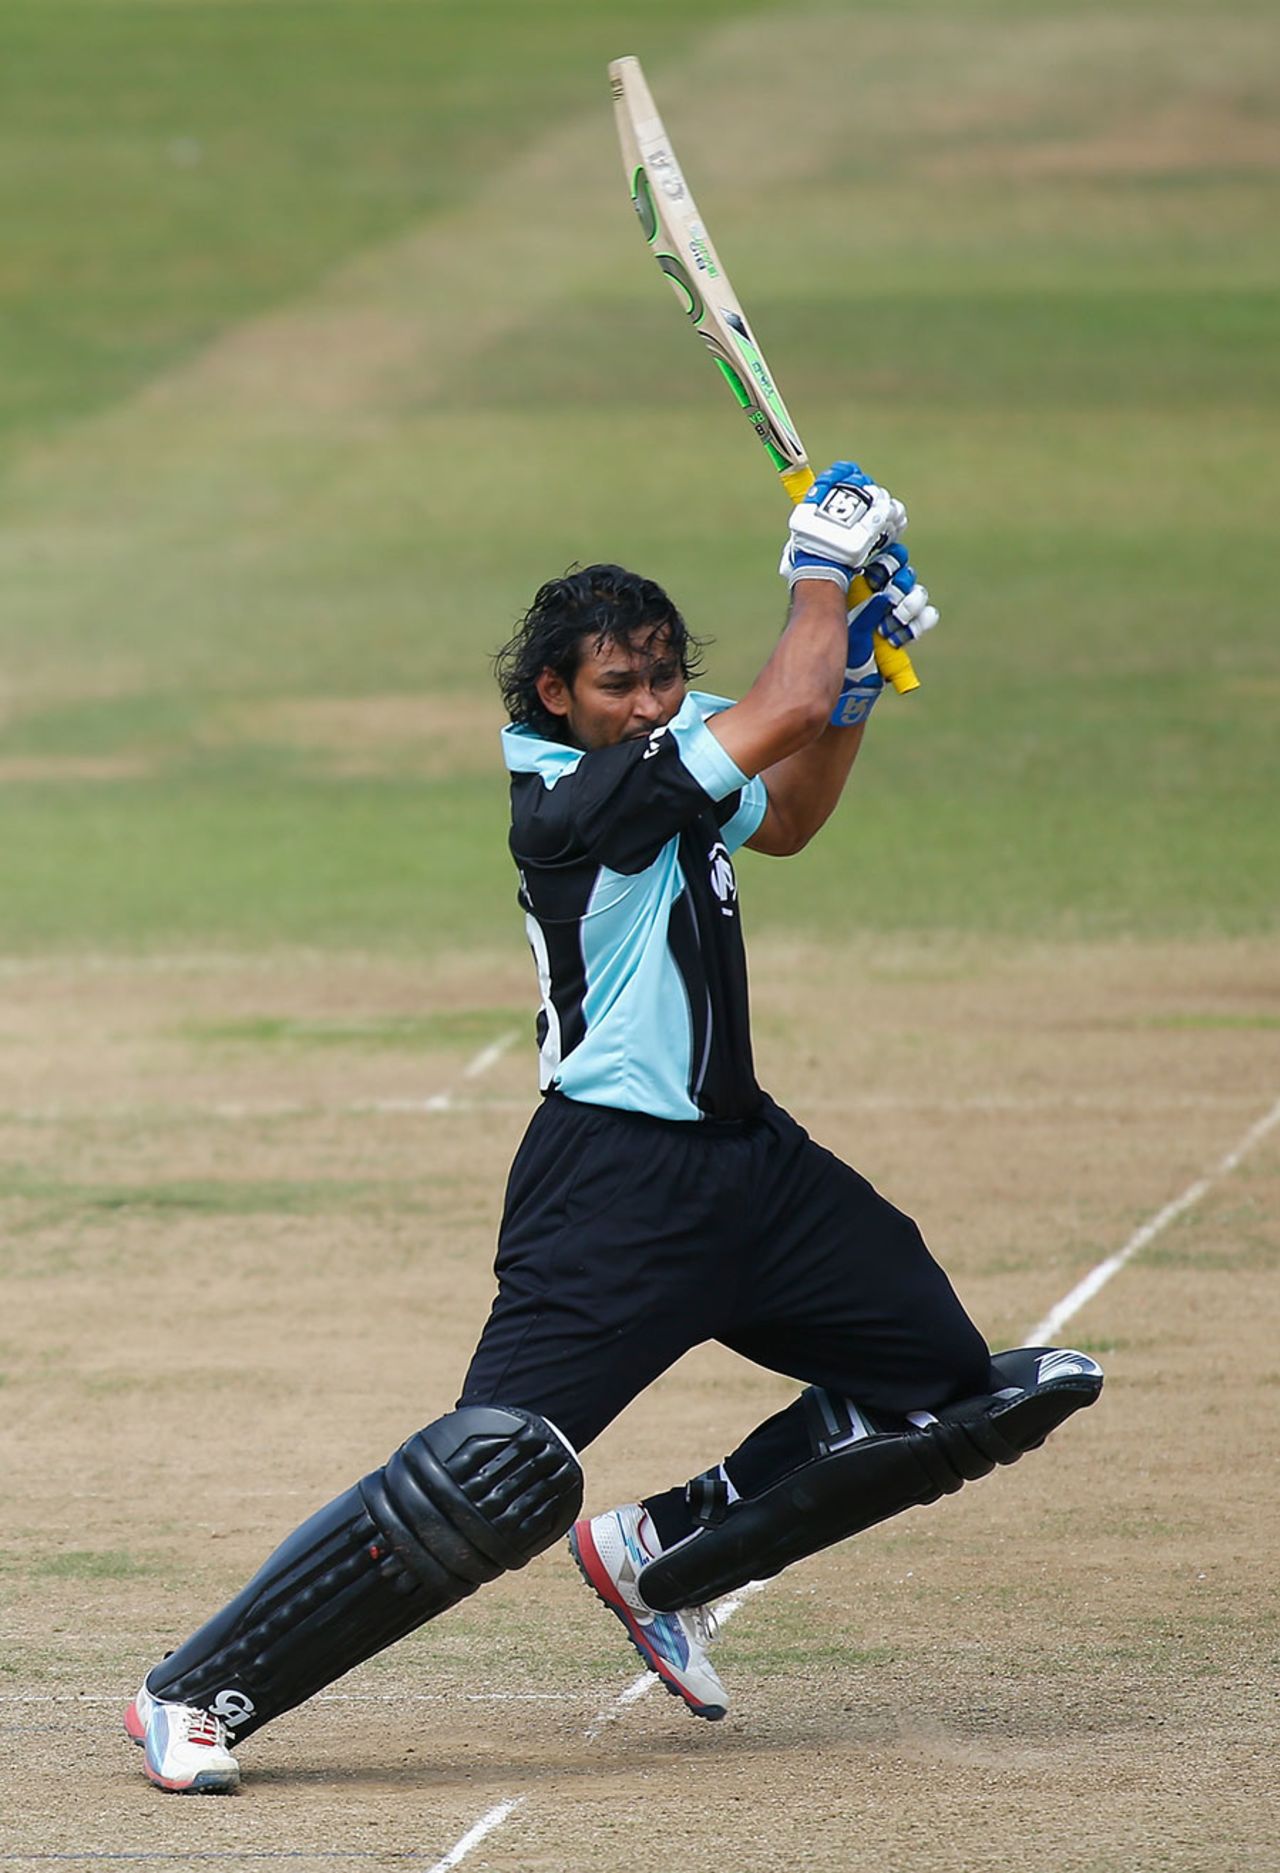 Tillakaratne Dilshan drives on his way to a century, Middlesex v Surrey, Royal London Cup, Lord's, July 31, 2014